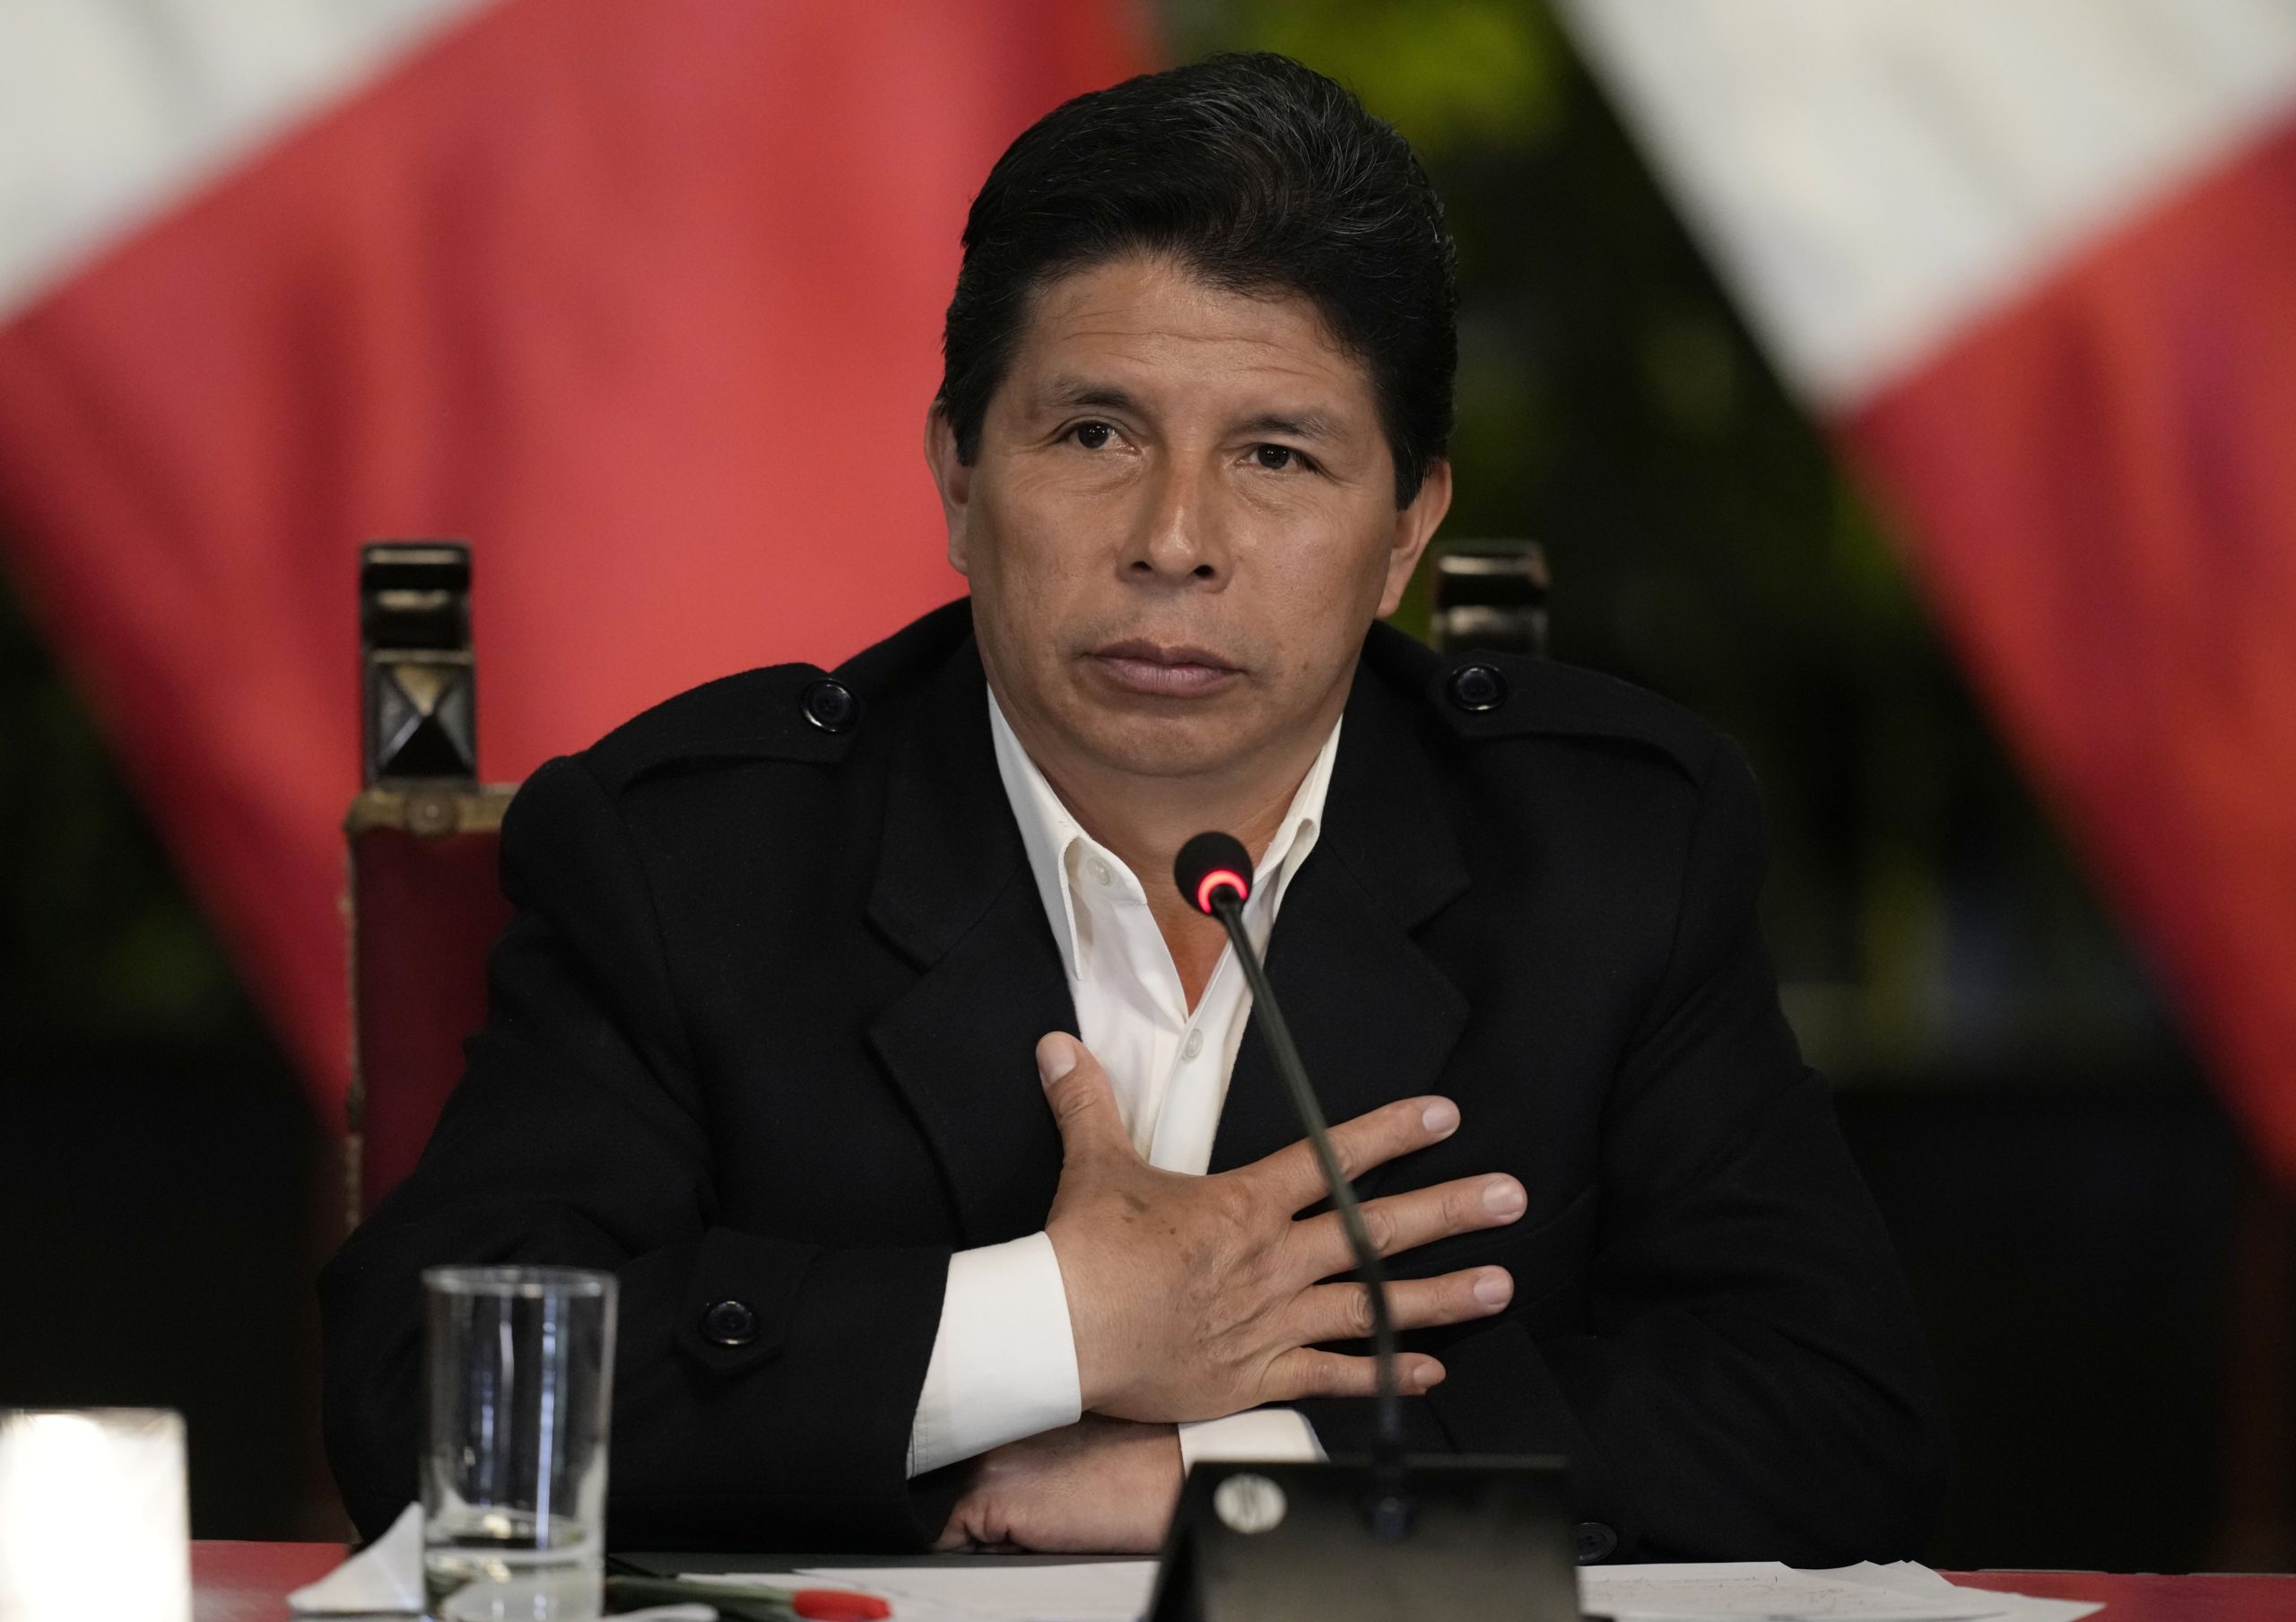 Peruvian President Pedro Castillo gives a news conference at the presidential palace in Lima on Oct. 11.